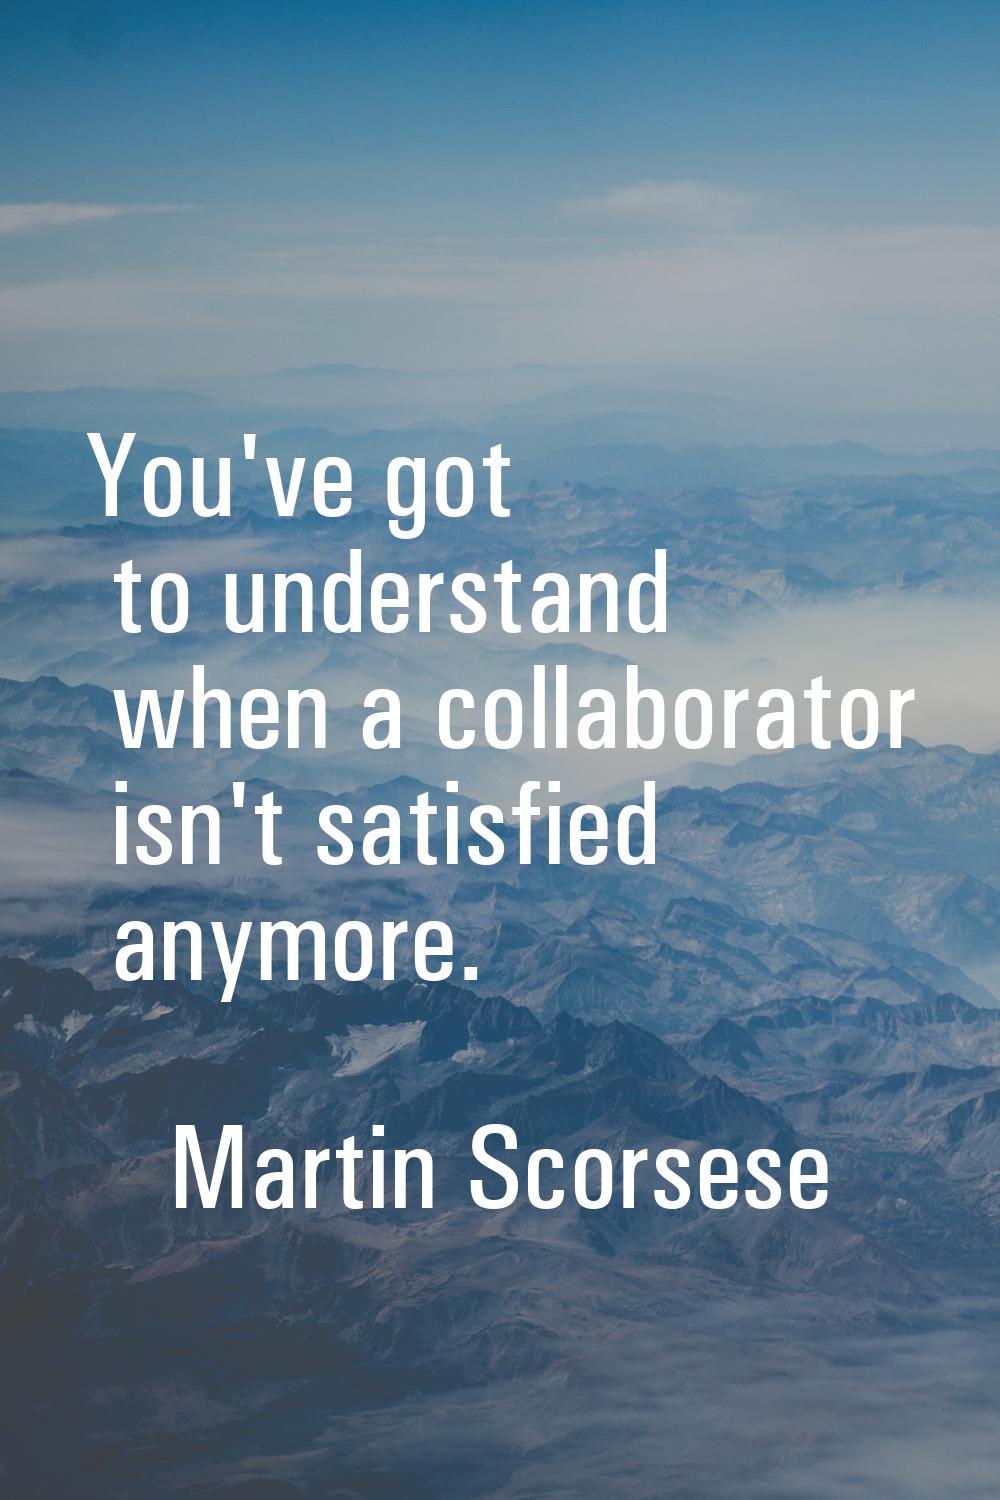 You've got to understand when a collaborator isn't satisfied anymore.